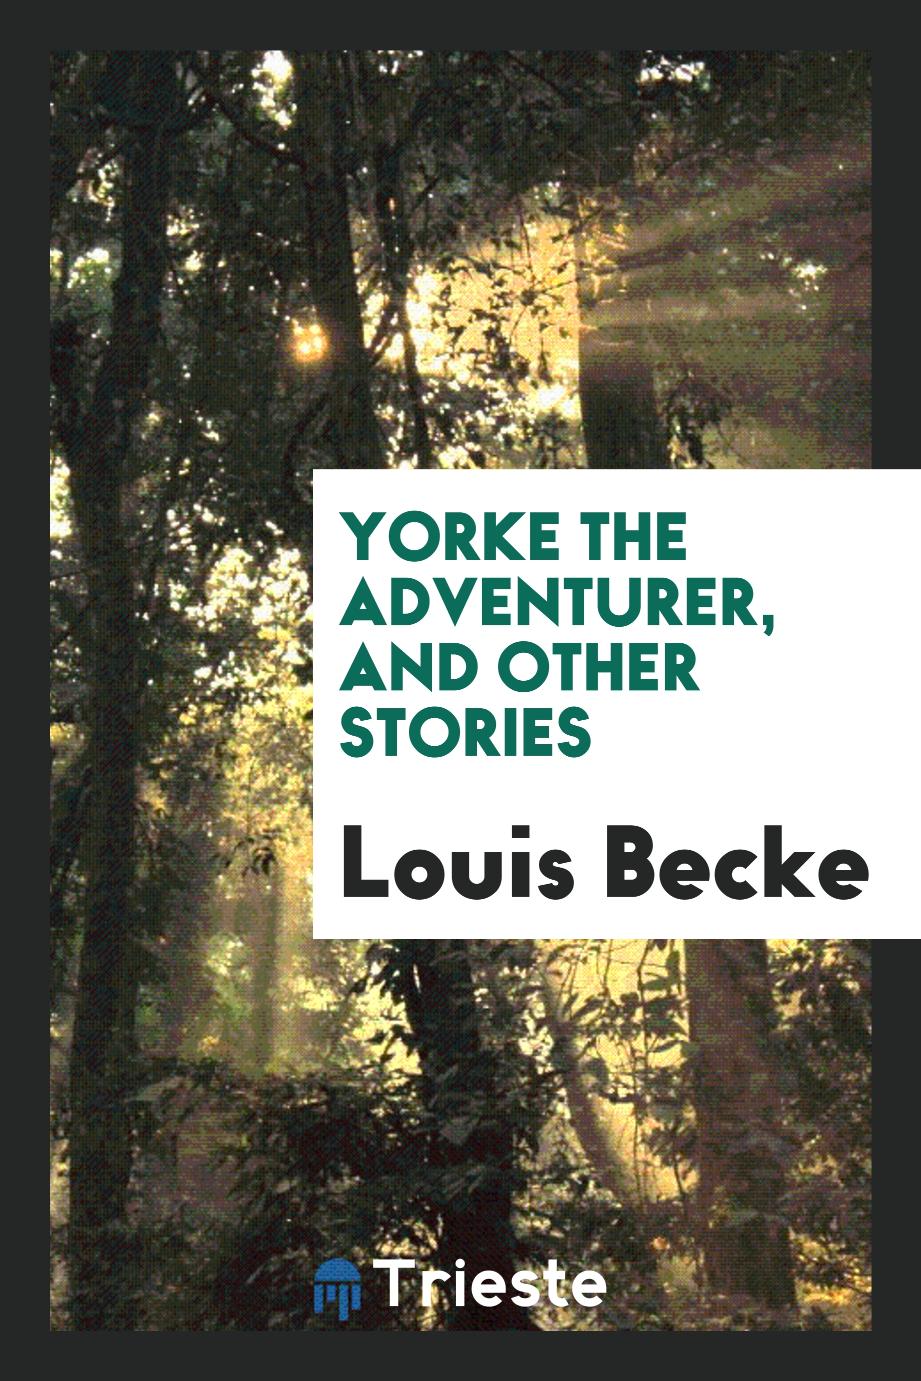 Yorke the adventurer, and other stories